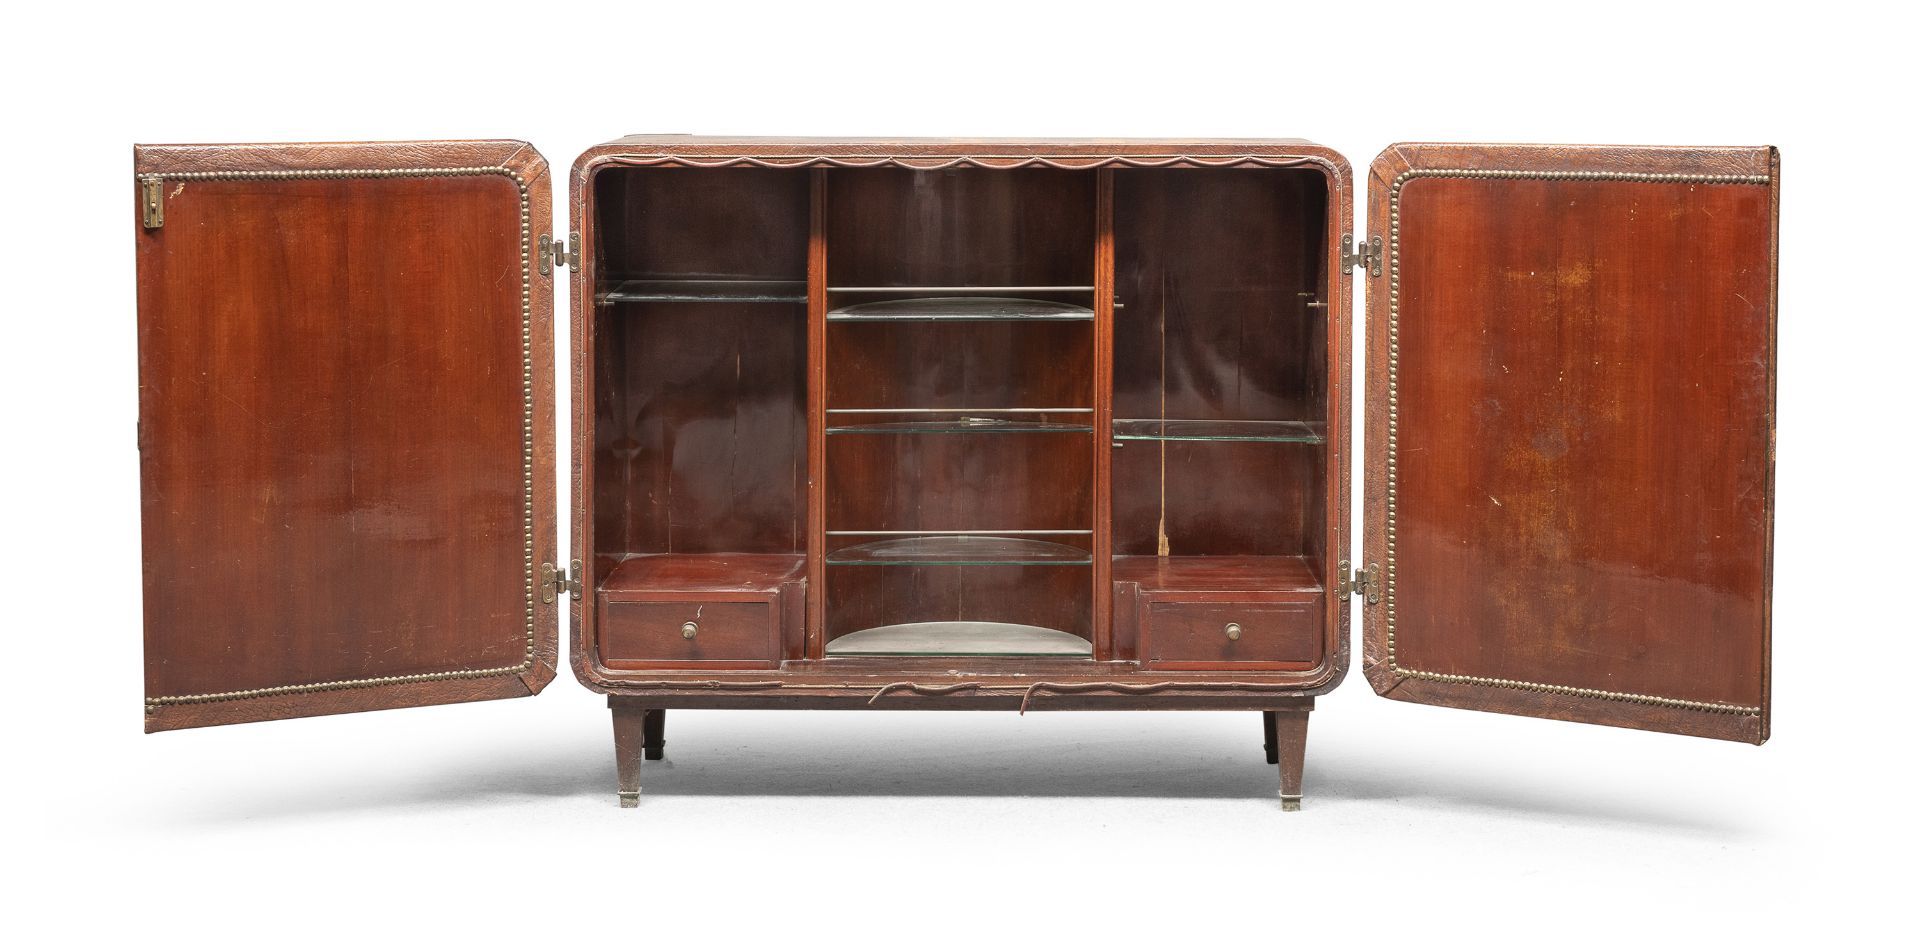 SIDEBOARD IN MAHOGANY AND LEATHER 1930 ca. - Image 2 of 2